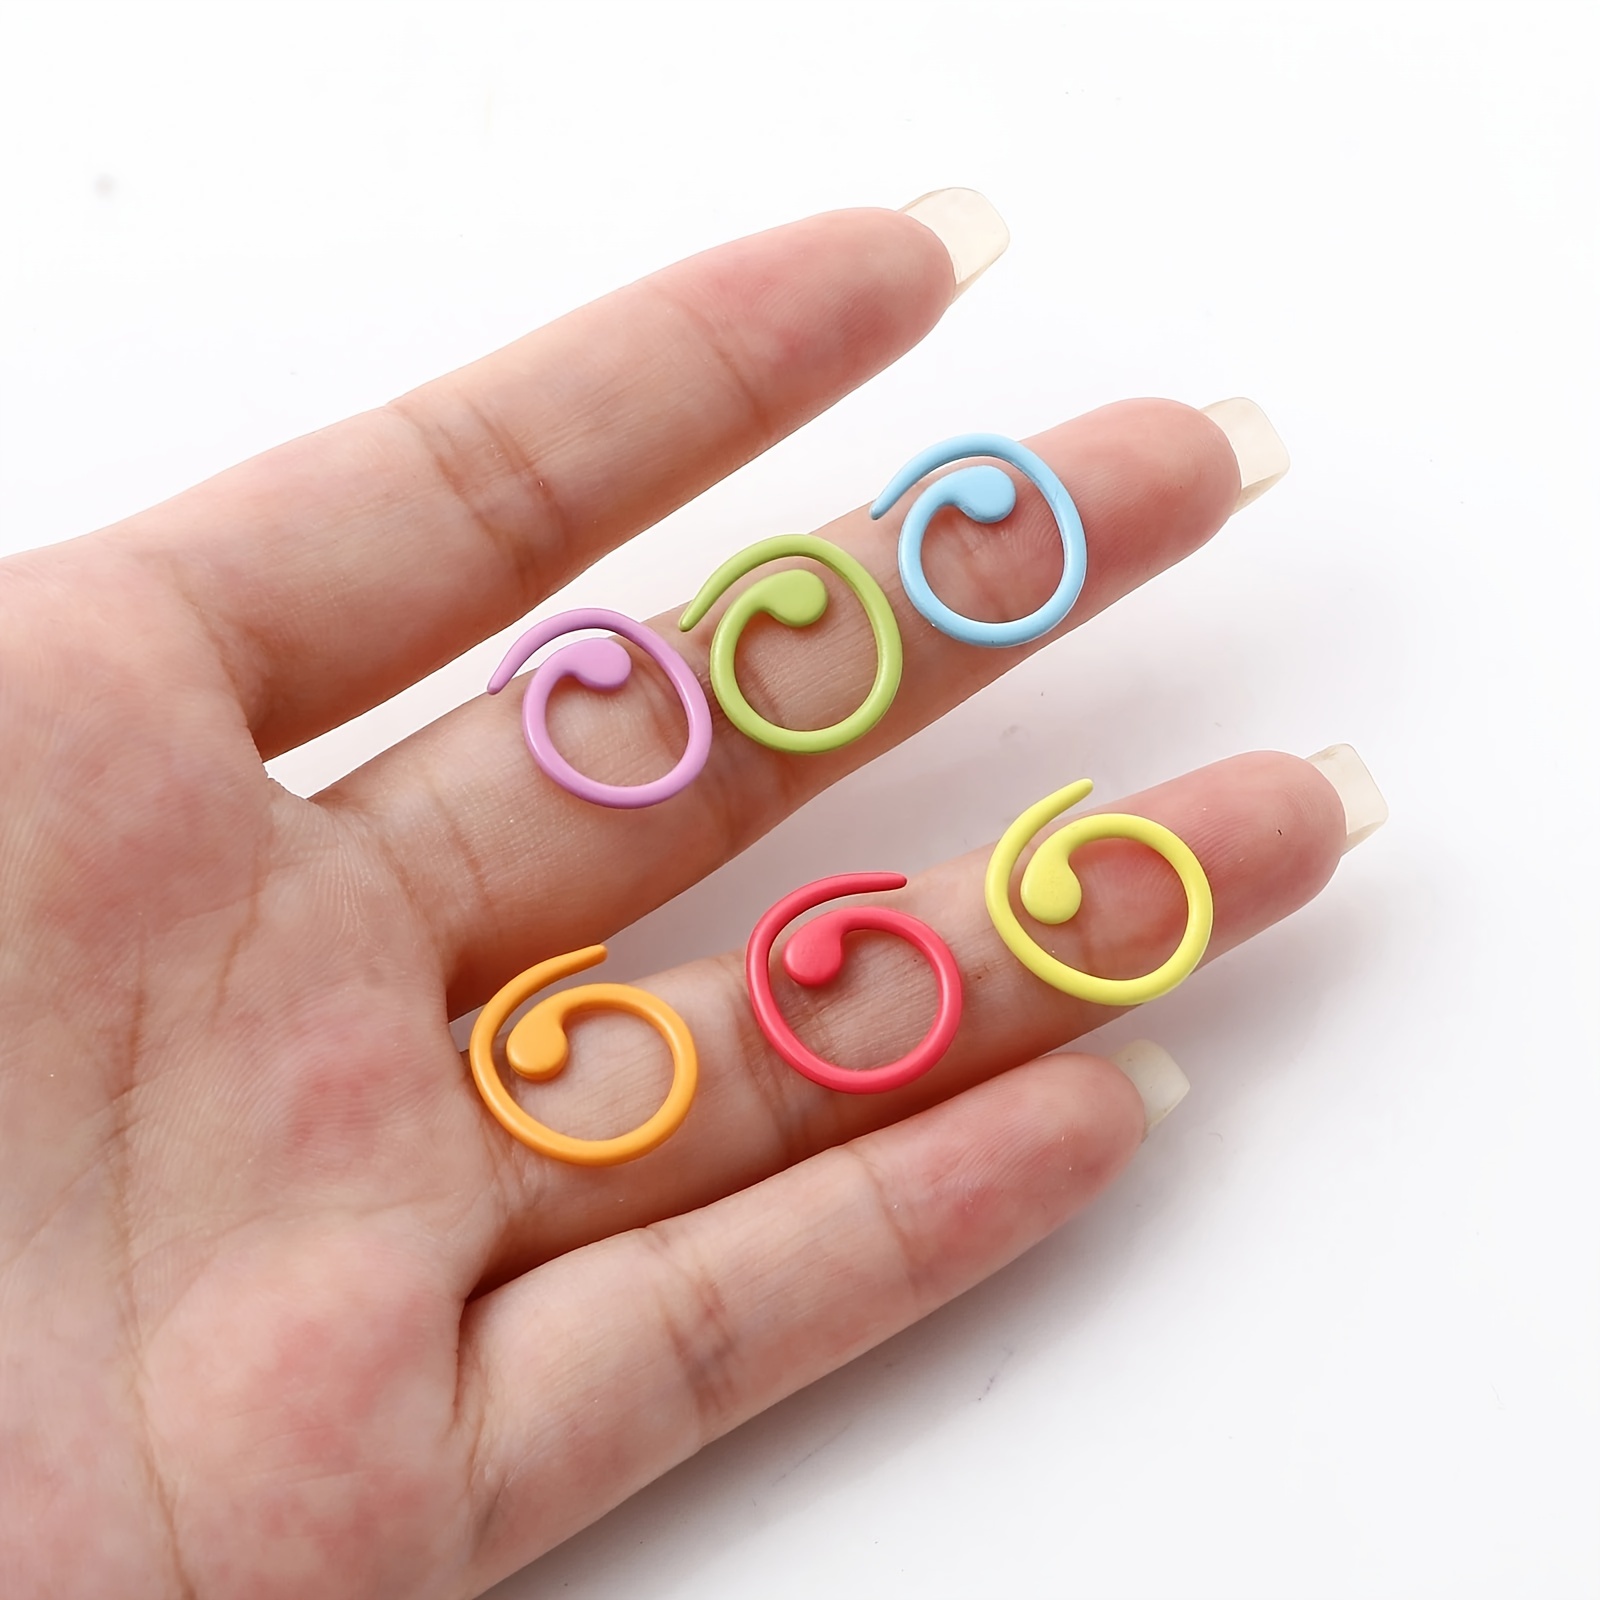 100Pcs Round Multicolor Plastic Knitting Crochet Locking Stitch Markers  Rings Clips No.01 